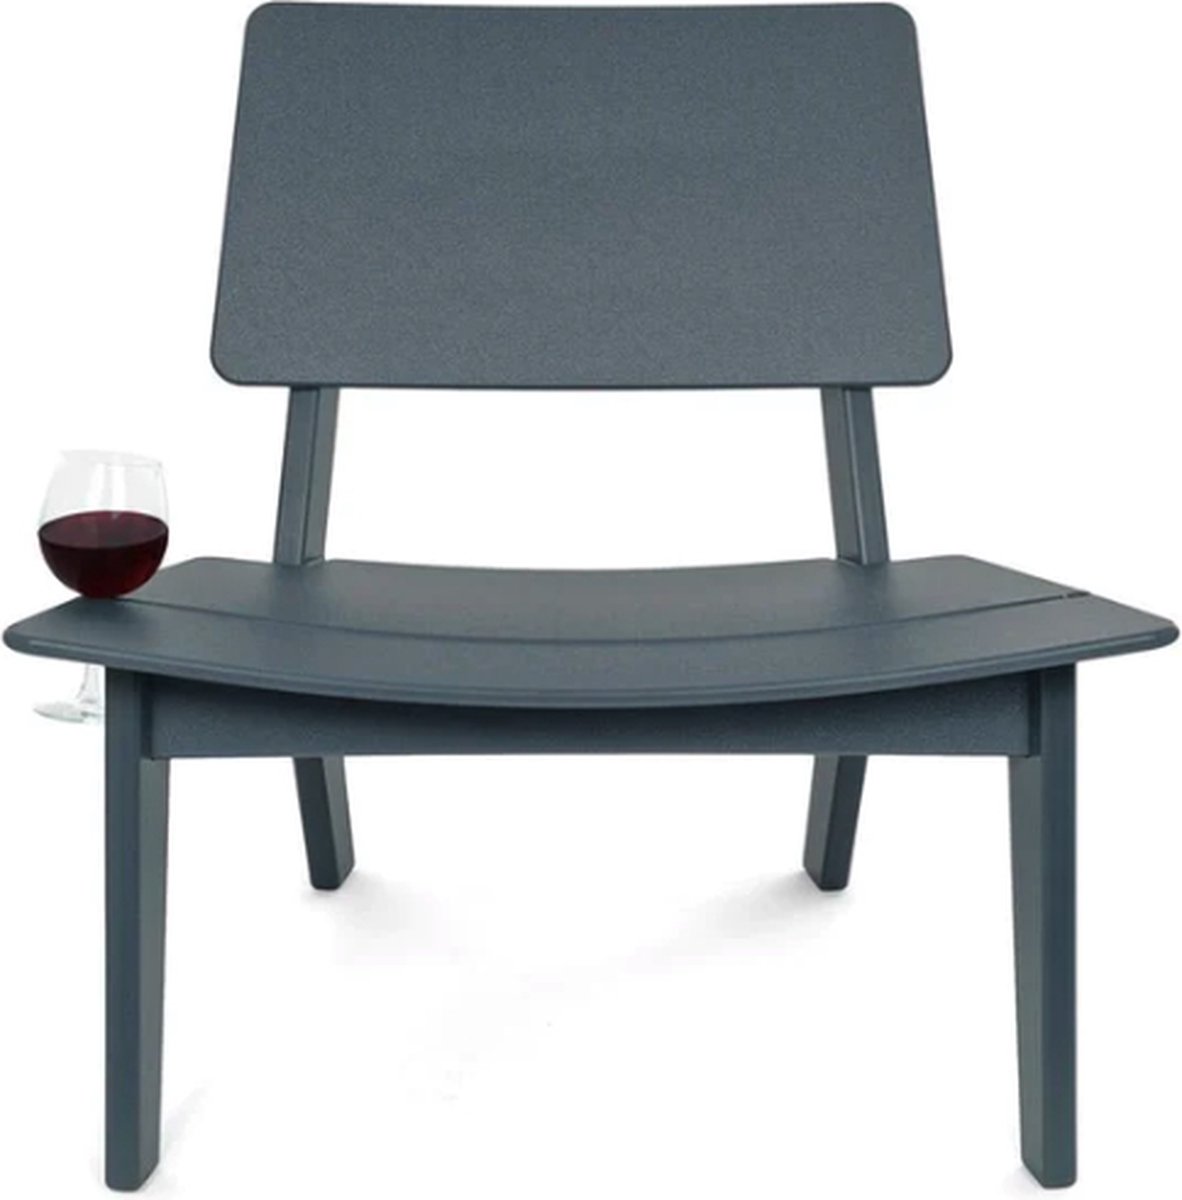 Loll Designs LAGO lounge chair - Chargoal Grey (antraciet)